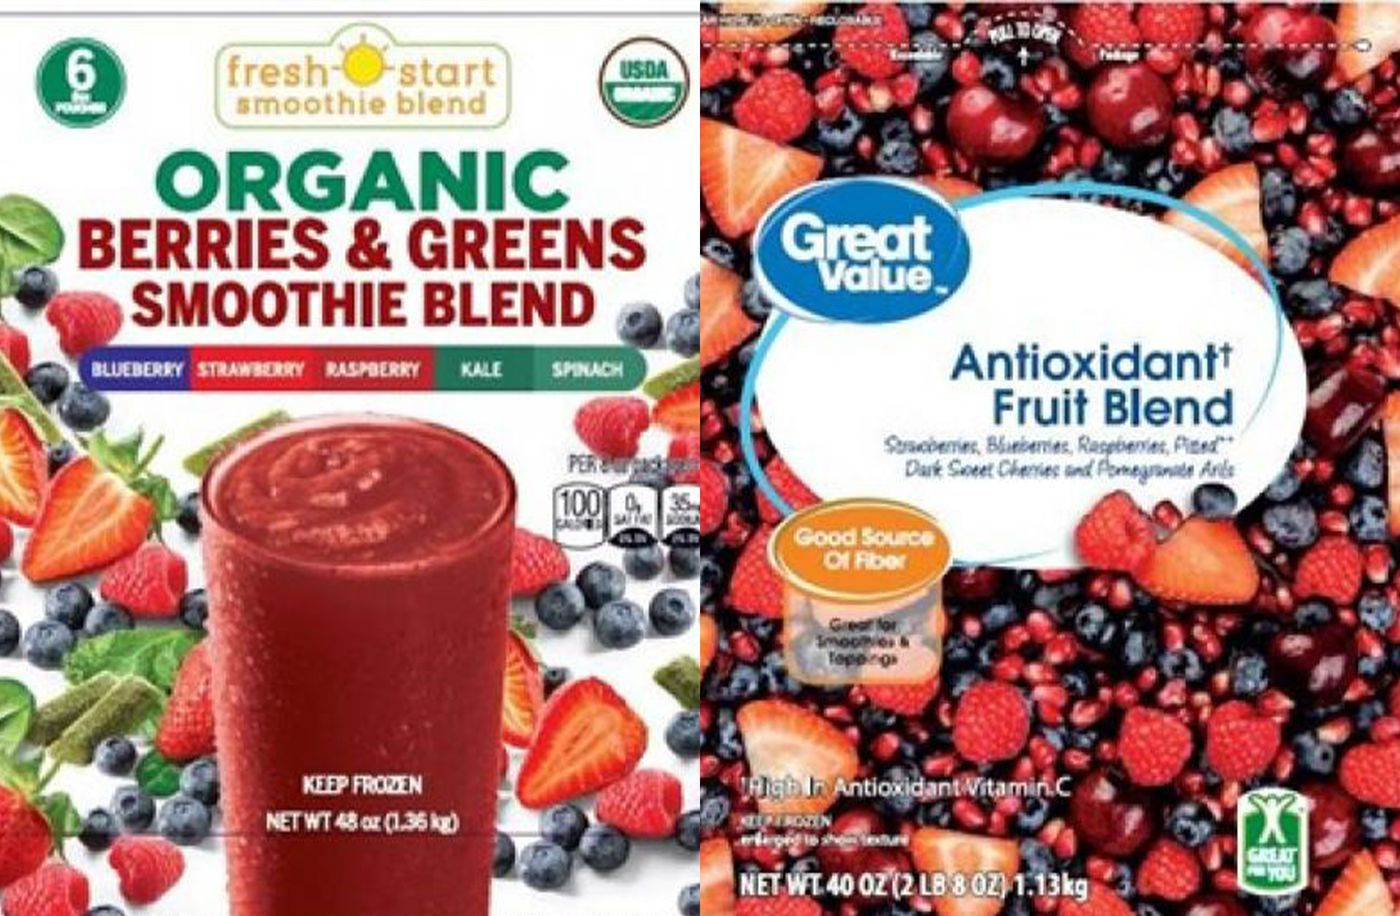 FDA Issues Nationwide Recall of Frozen Strawberries Amid Hepatitis A